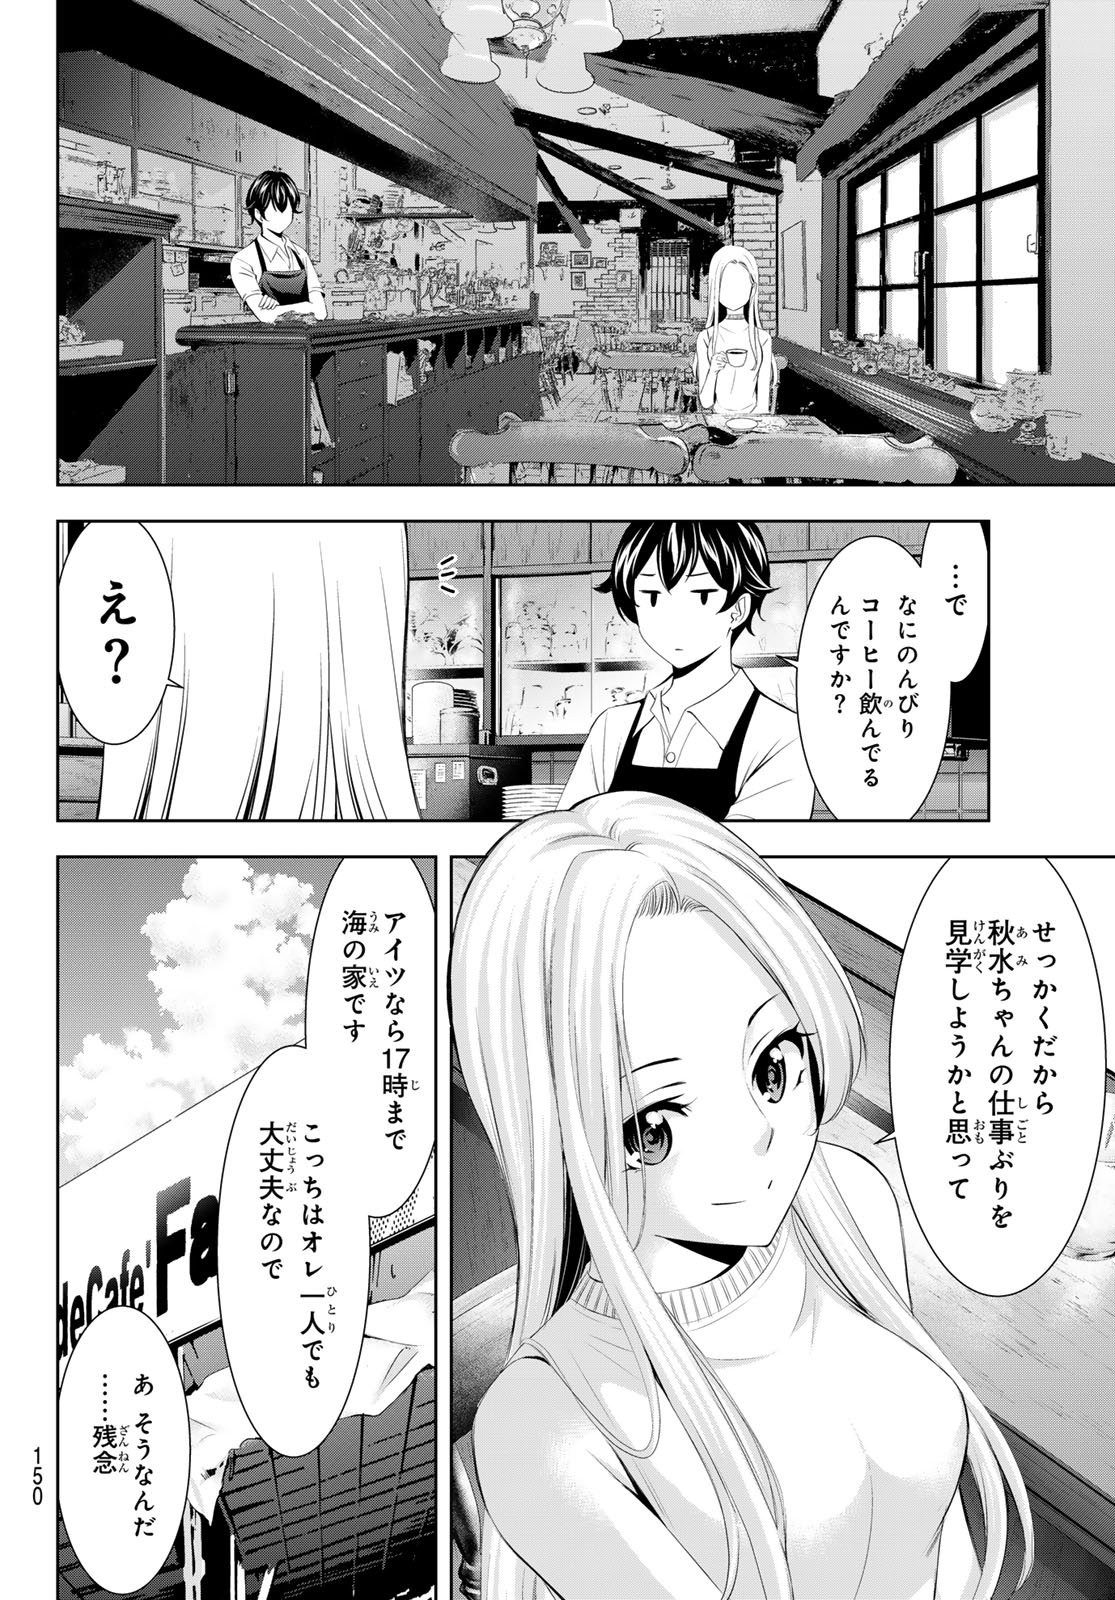 Megami no Cafe Terace - Chapter 151 - Page 7